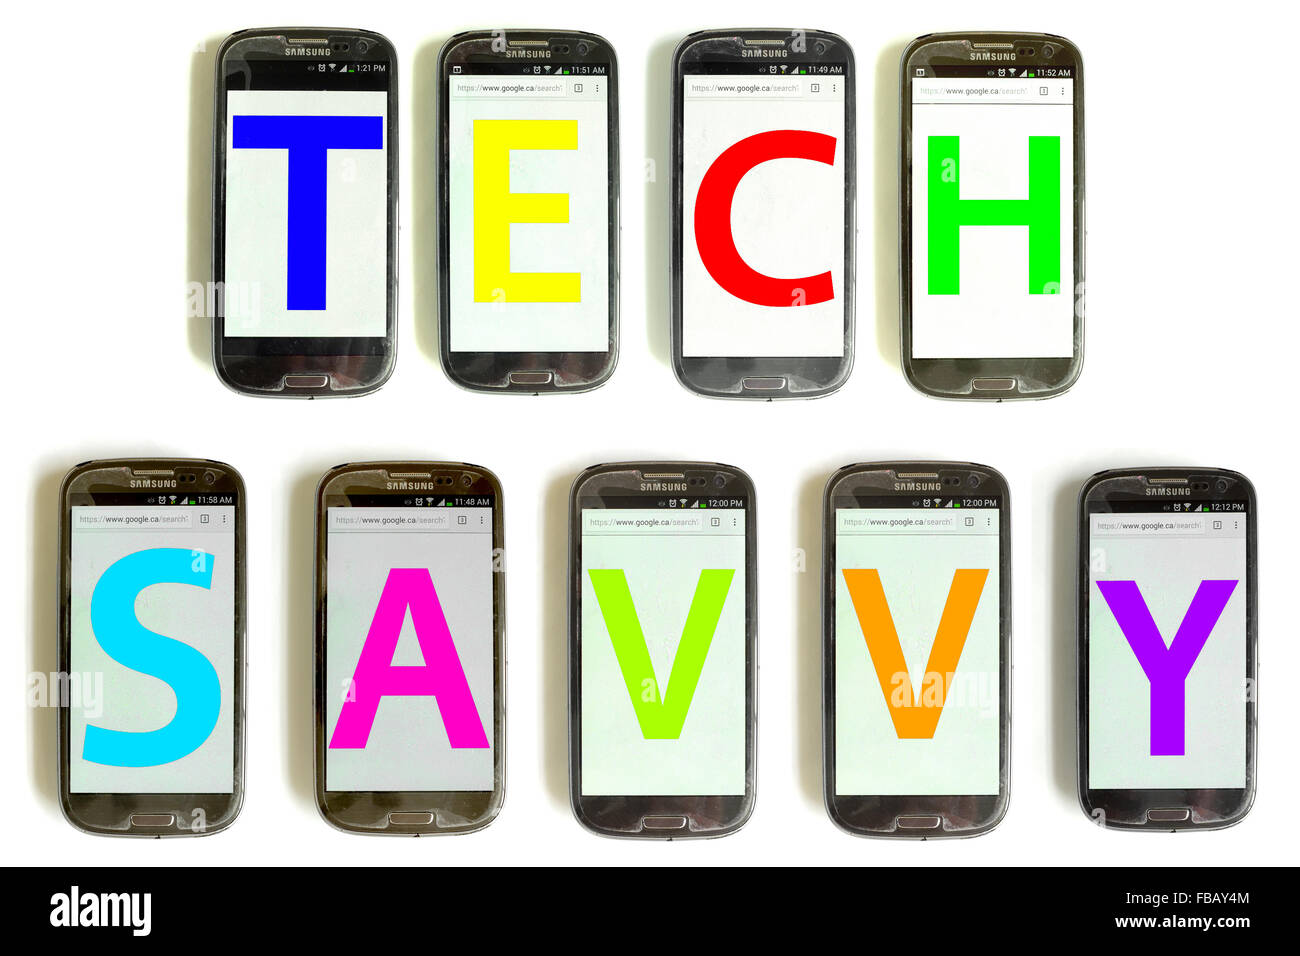 Tech Savvy spelled out on mobile phone screens photographed against a white background. Stock Photo